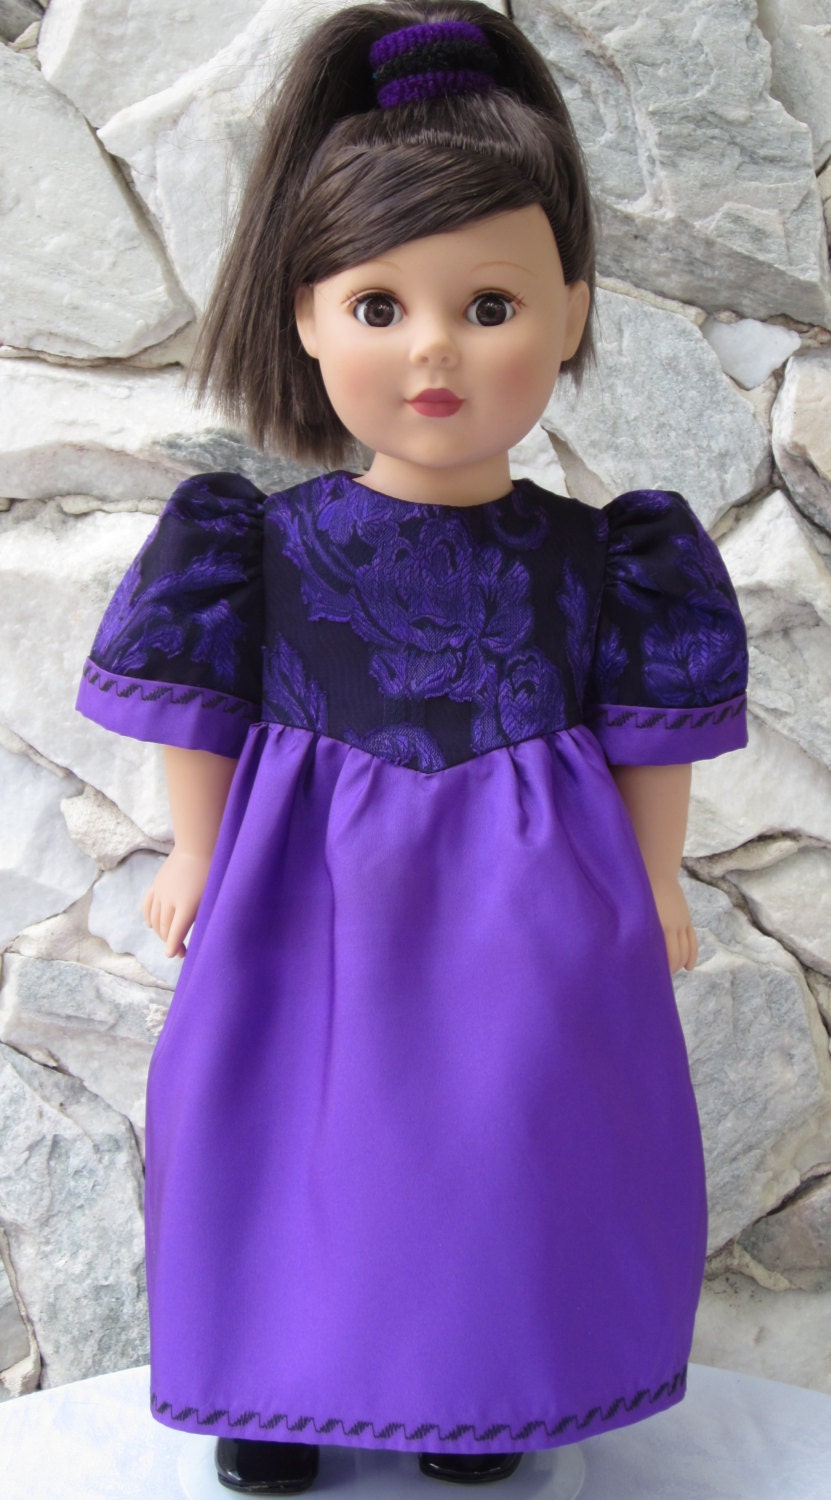 Red-violet taffeta gown with a black & purple chiffon overlaid bodice for an 18" doll. - TinaDollDesigns